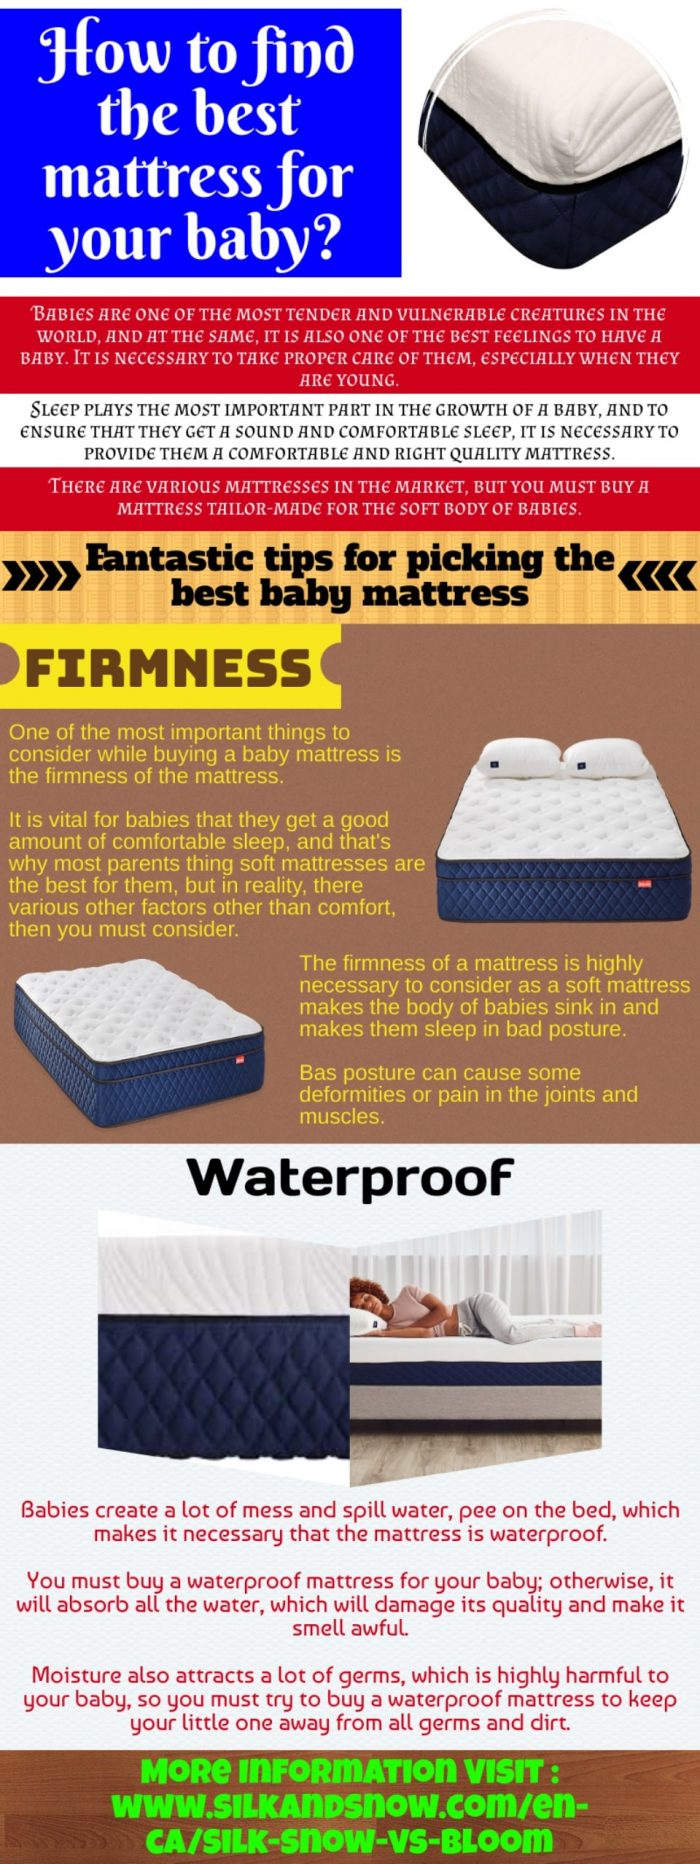 Memory foam beds-Long-lasting durability and extra comfort